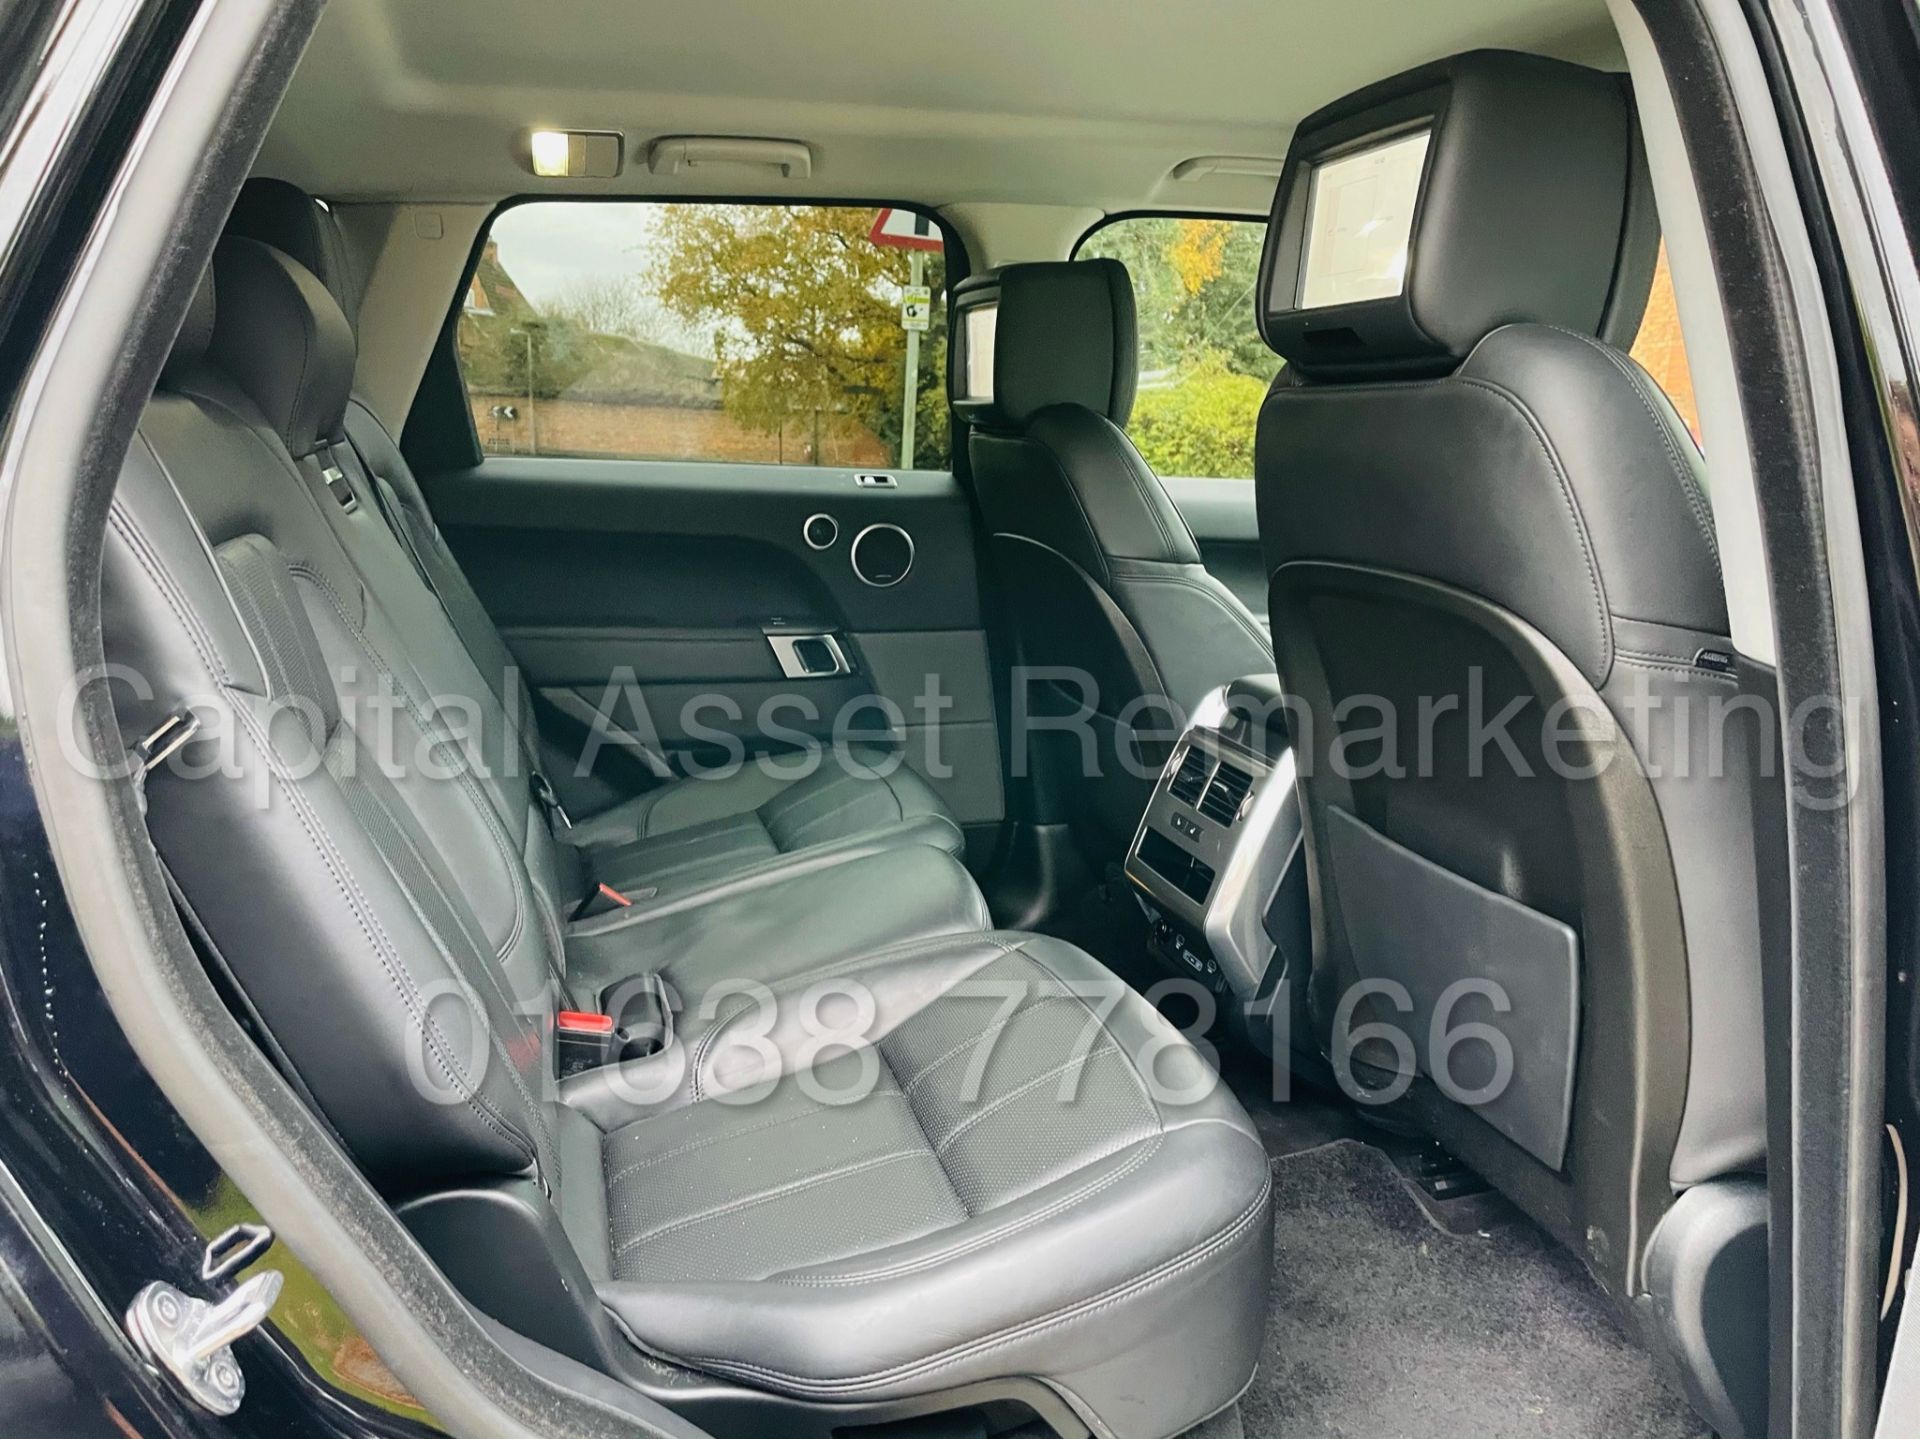 RANGE ROVER SPORT *HSE EDITION* SUV (2019 MODEL) '3.0 SDV6 - 306 BHP - 8 SPEED AUTO' *FULLY LOADED* - Image 31 of 56